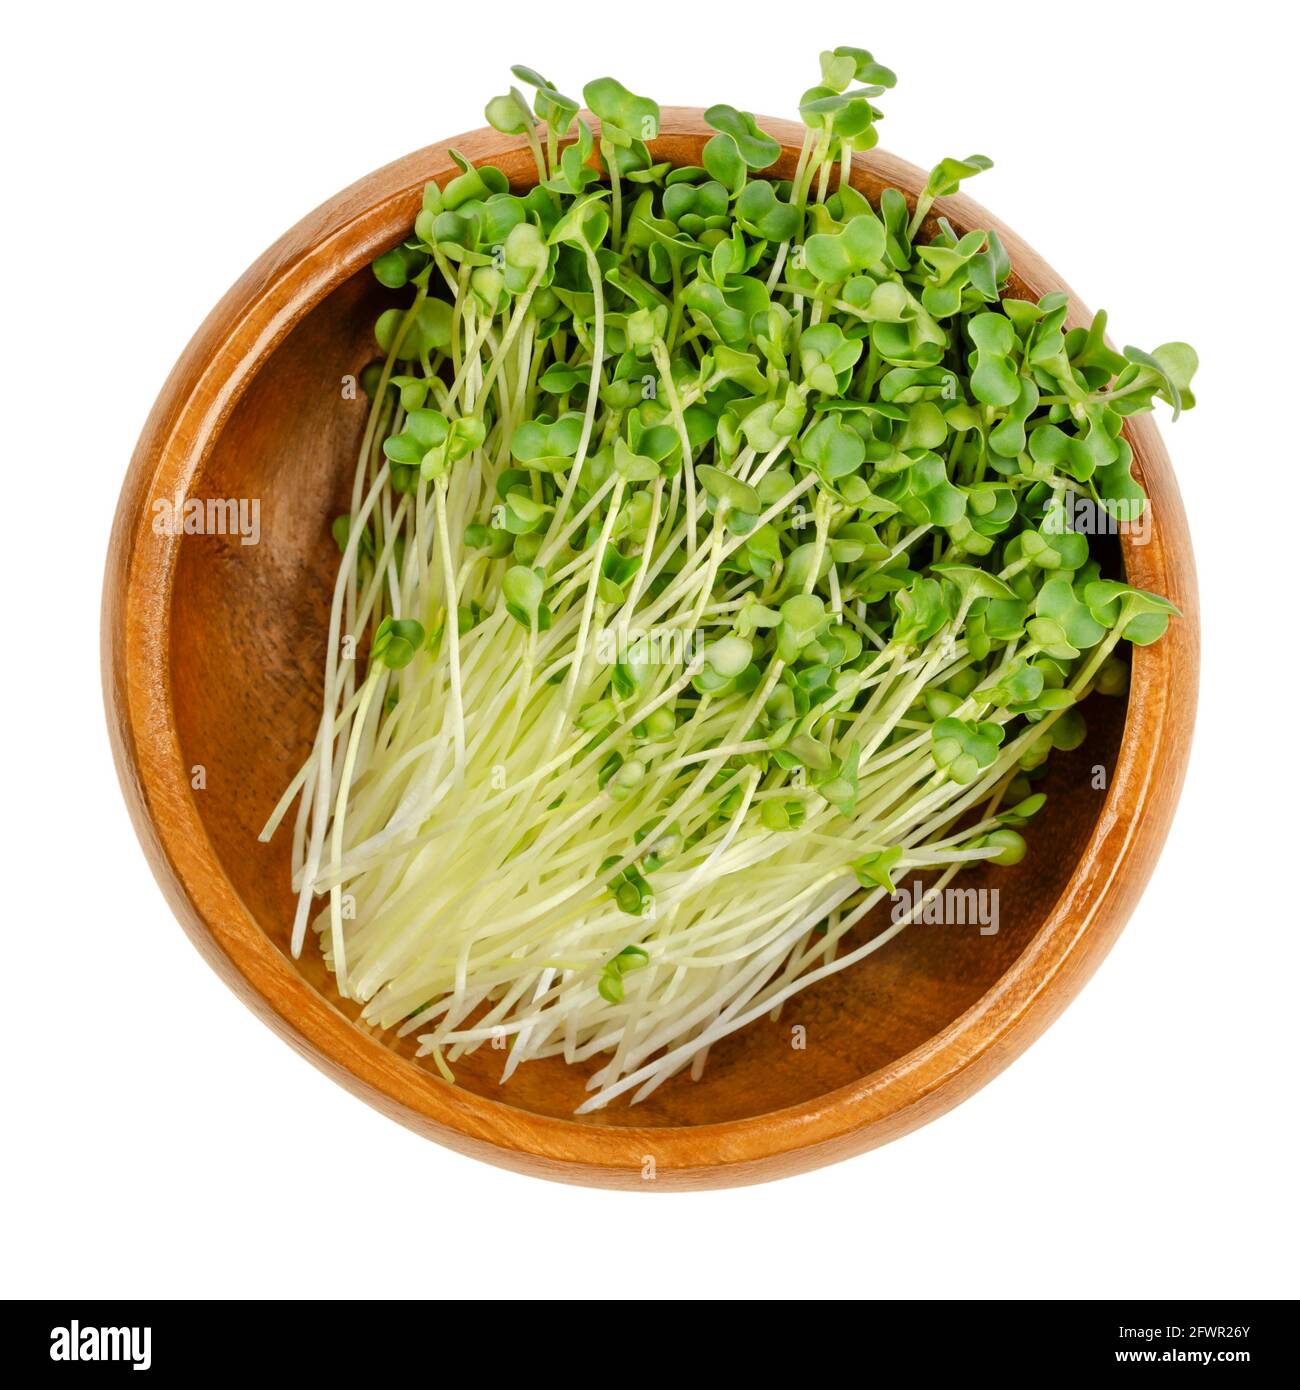 Rapeseed microgreens, in a wooden bowl. Ready to eat, green canola sprouts, seedlings, shoots and young plants of Brassica napus, used as garnish. Stock Photo